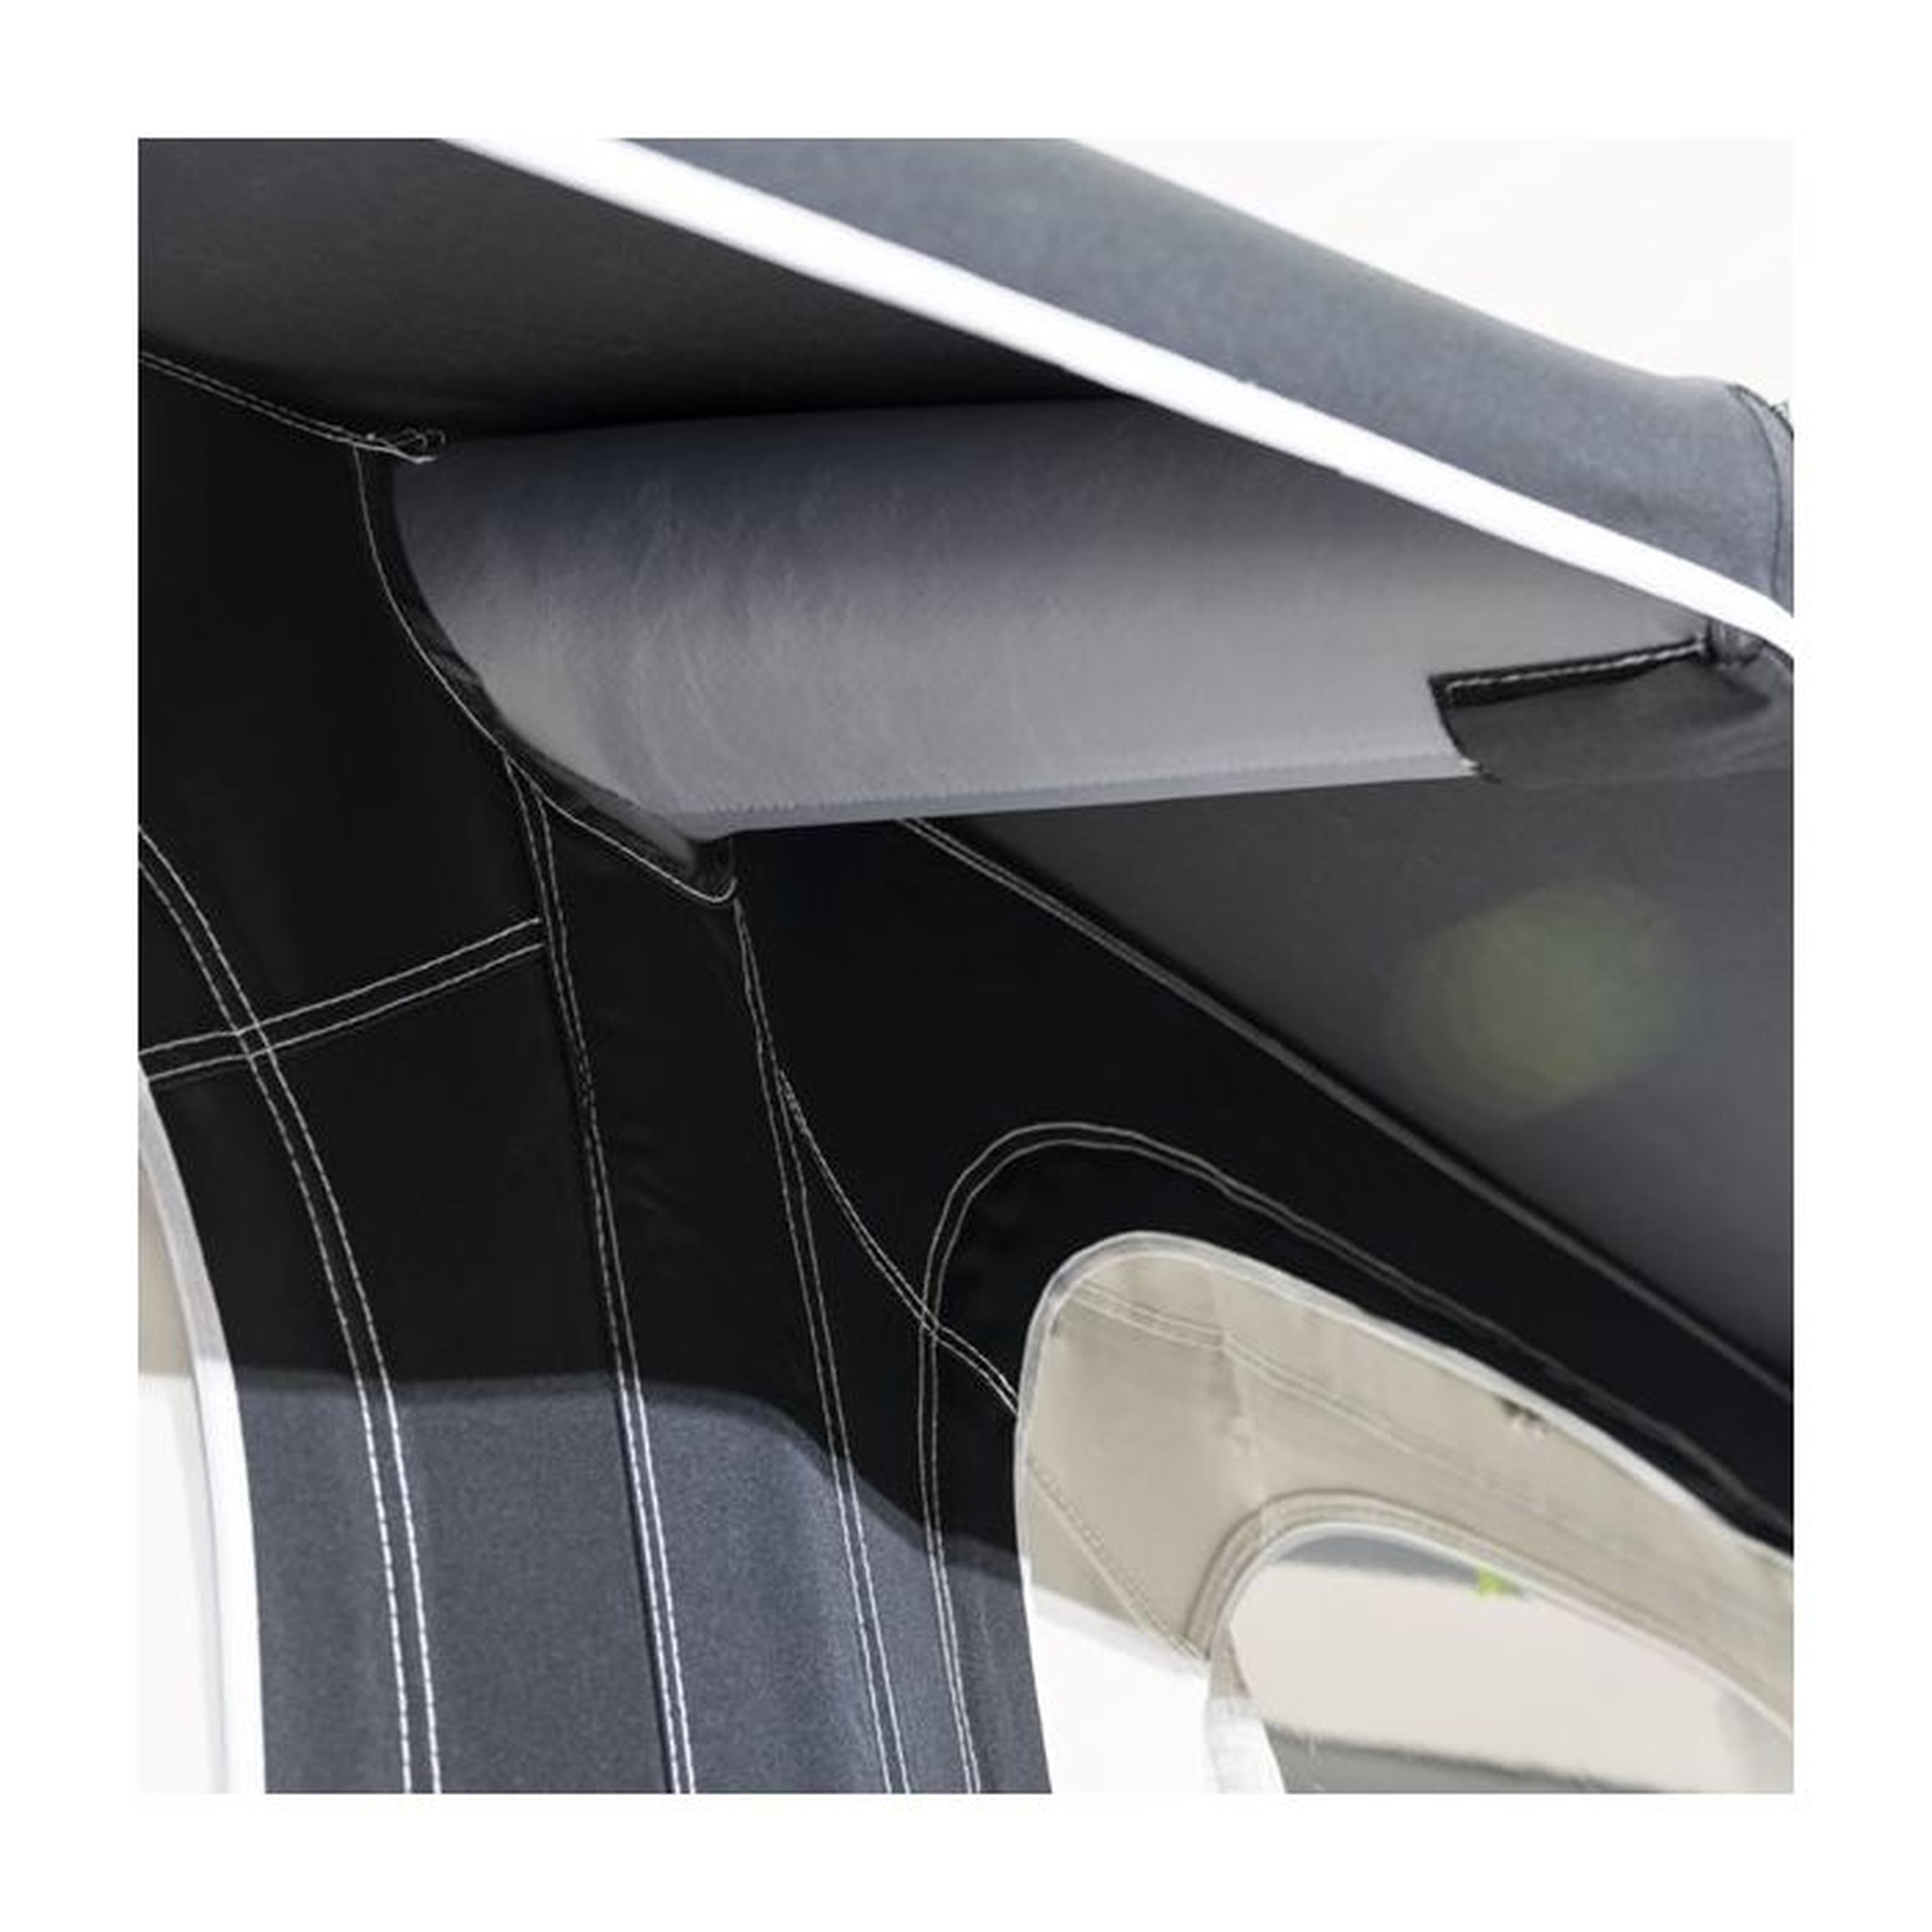 Dometic Ace Air Pro 400 S Awning 2022 Model - airbeam view